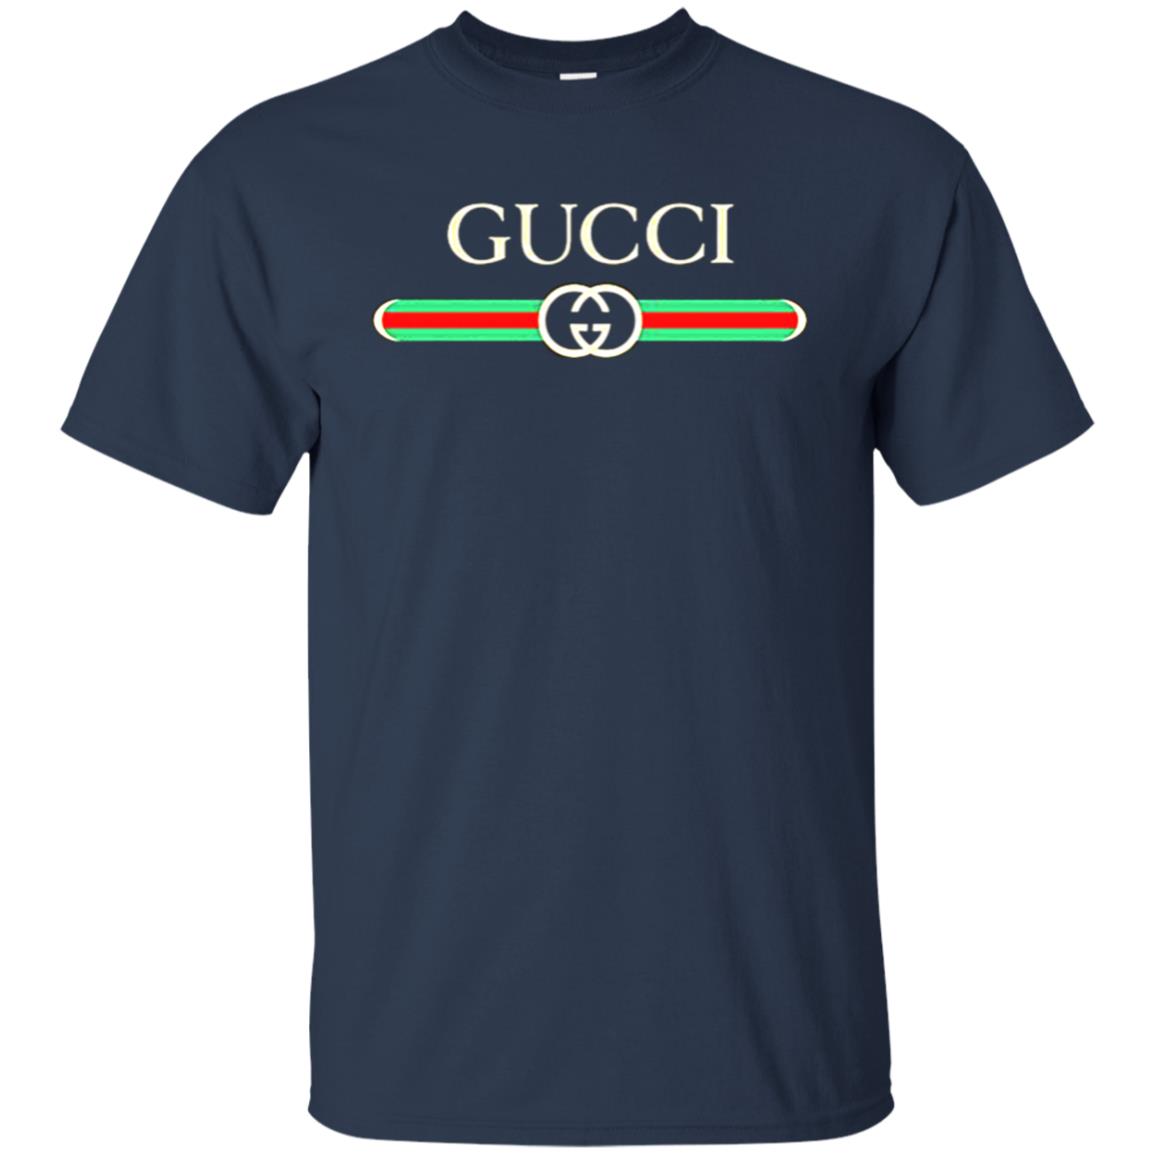 gucci inspired t shirt, OFF 70%,www 